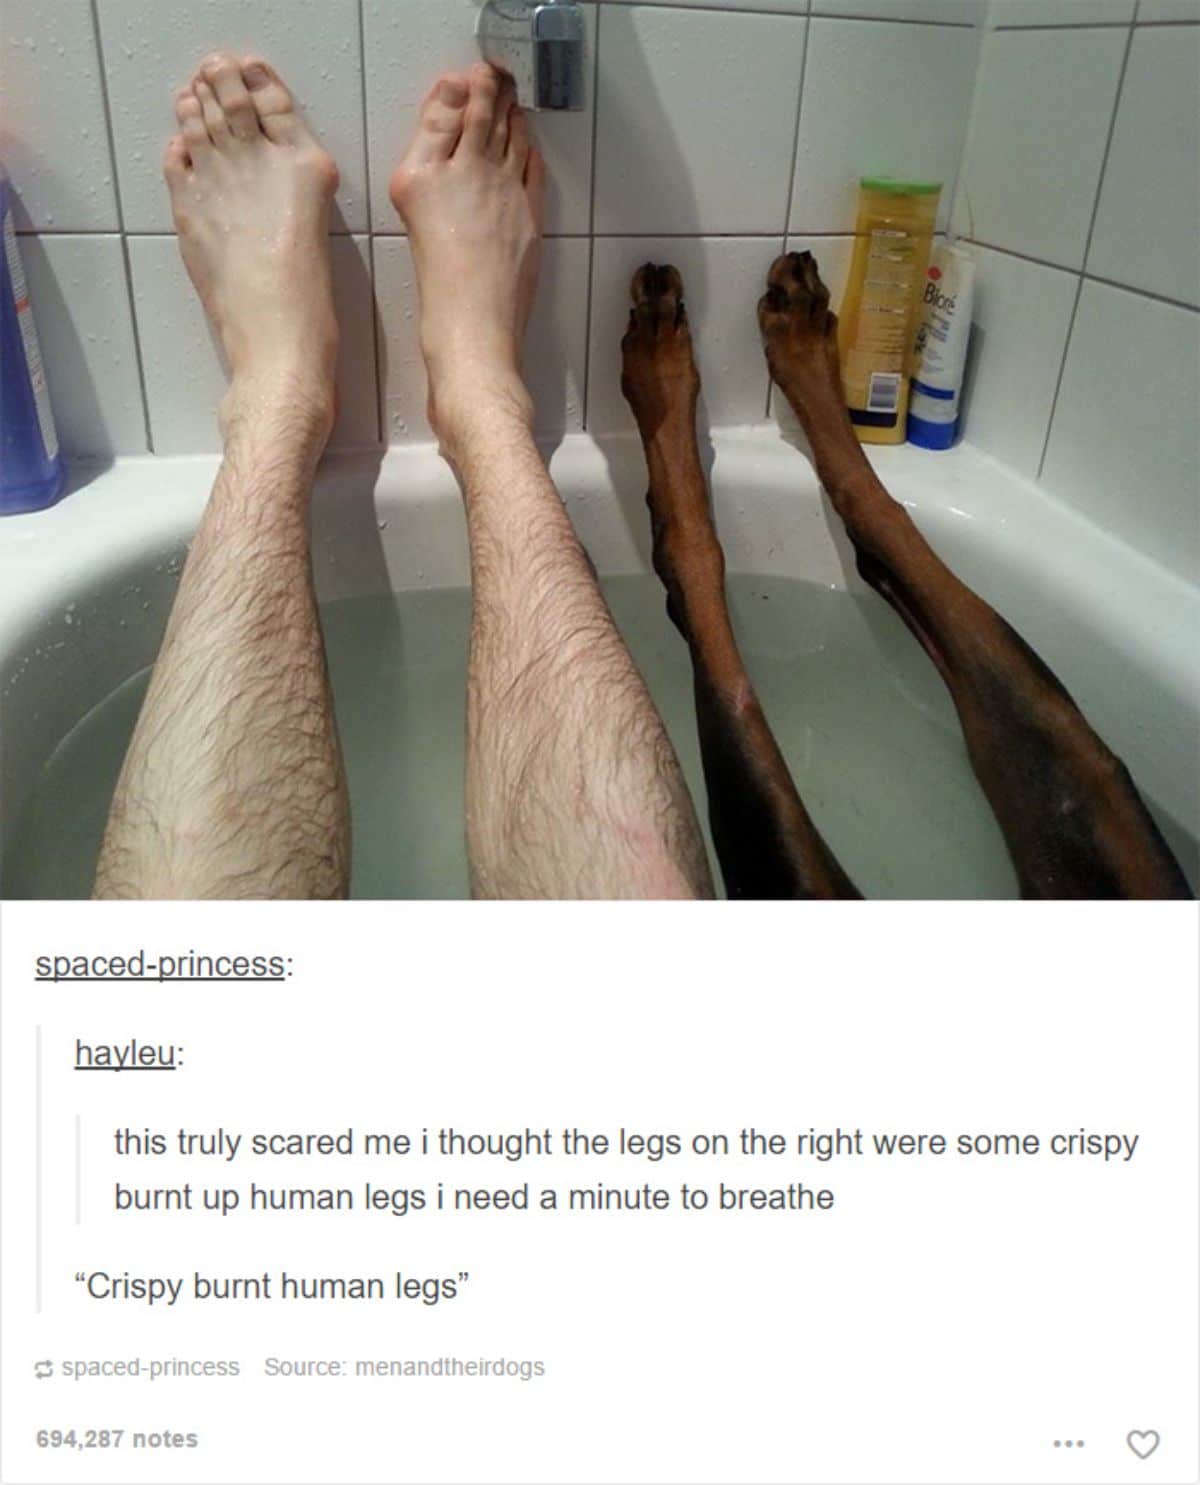 tumblr post of a man's legs next to a brown dog's legs in a bathtub and caption says it was scary and seemed like there are burnt up human legs